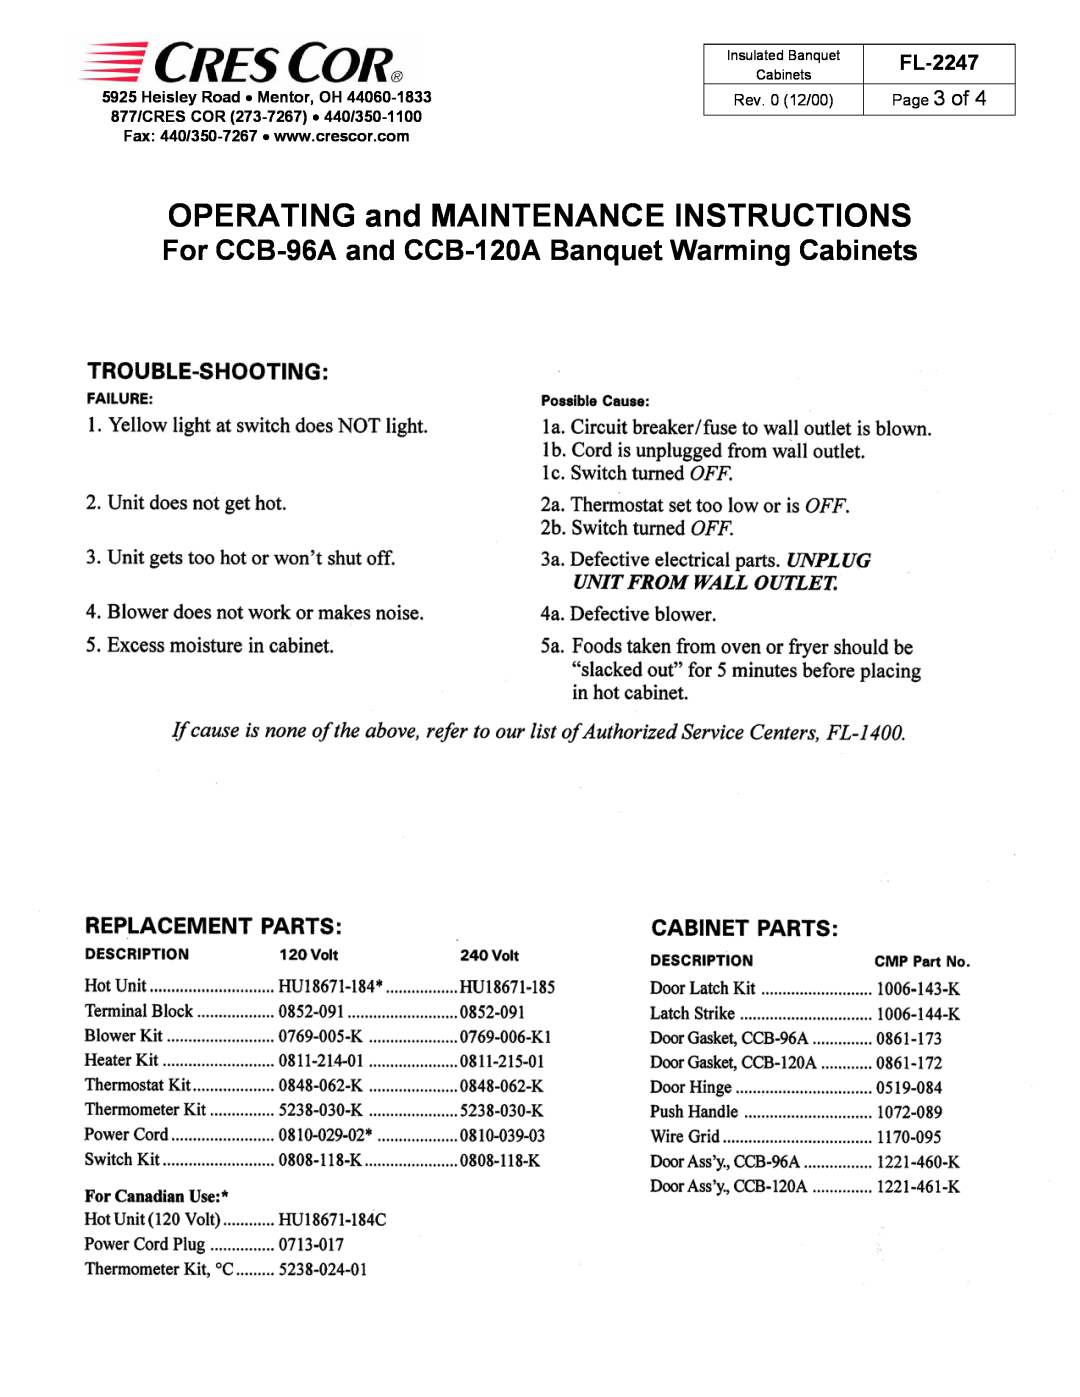 Cres Cor Page 3 of, OPERATING and MAINTENANCE INSTRUCTIONS, For CCB-96Aand CCB-120ABanquet Warming Cabinets, FL-2247 